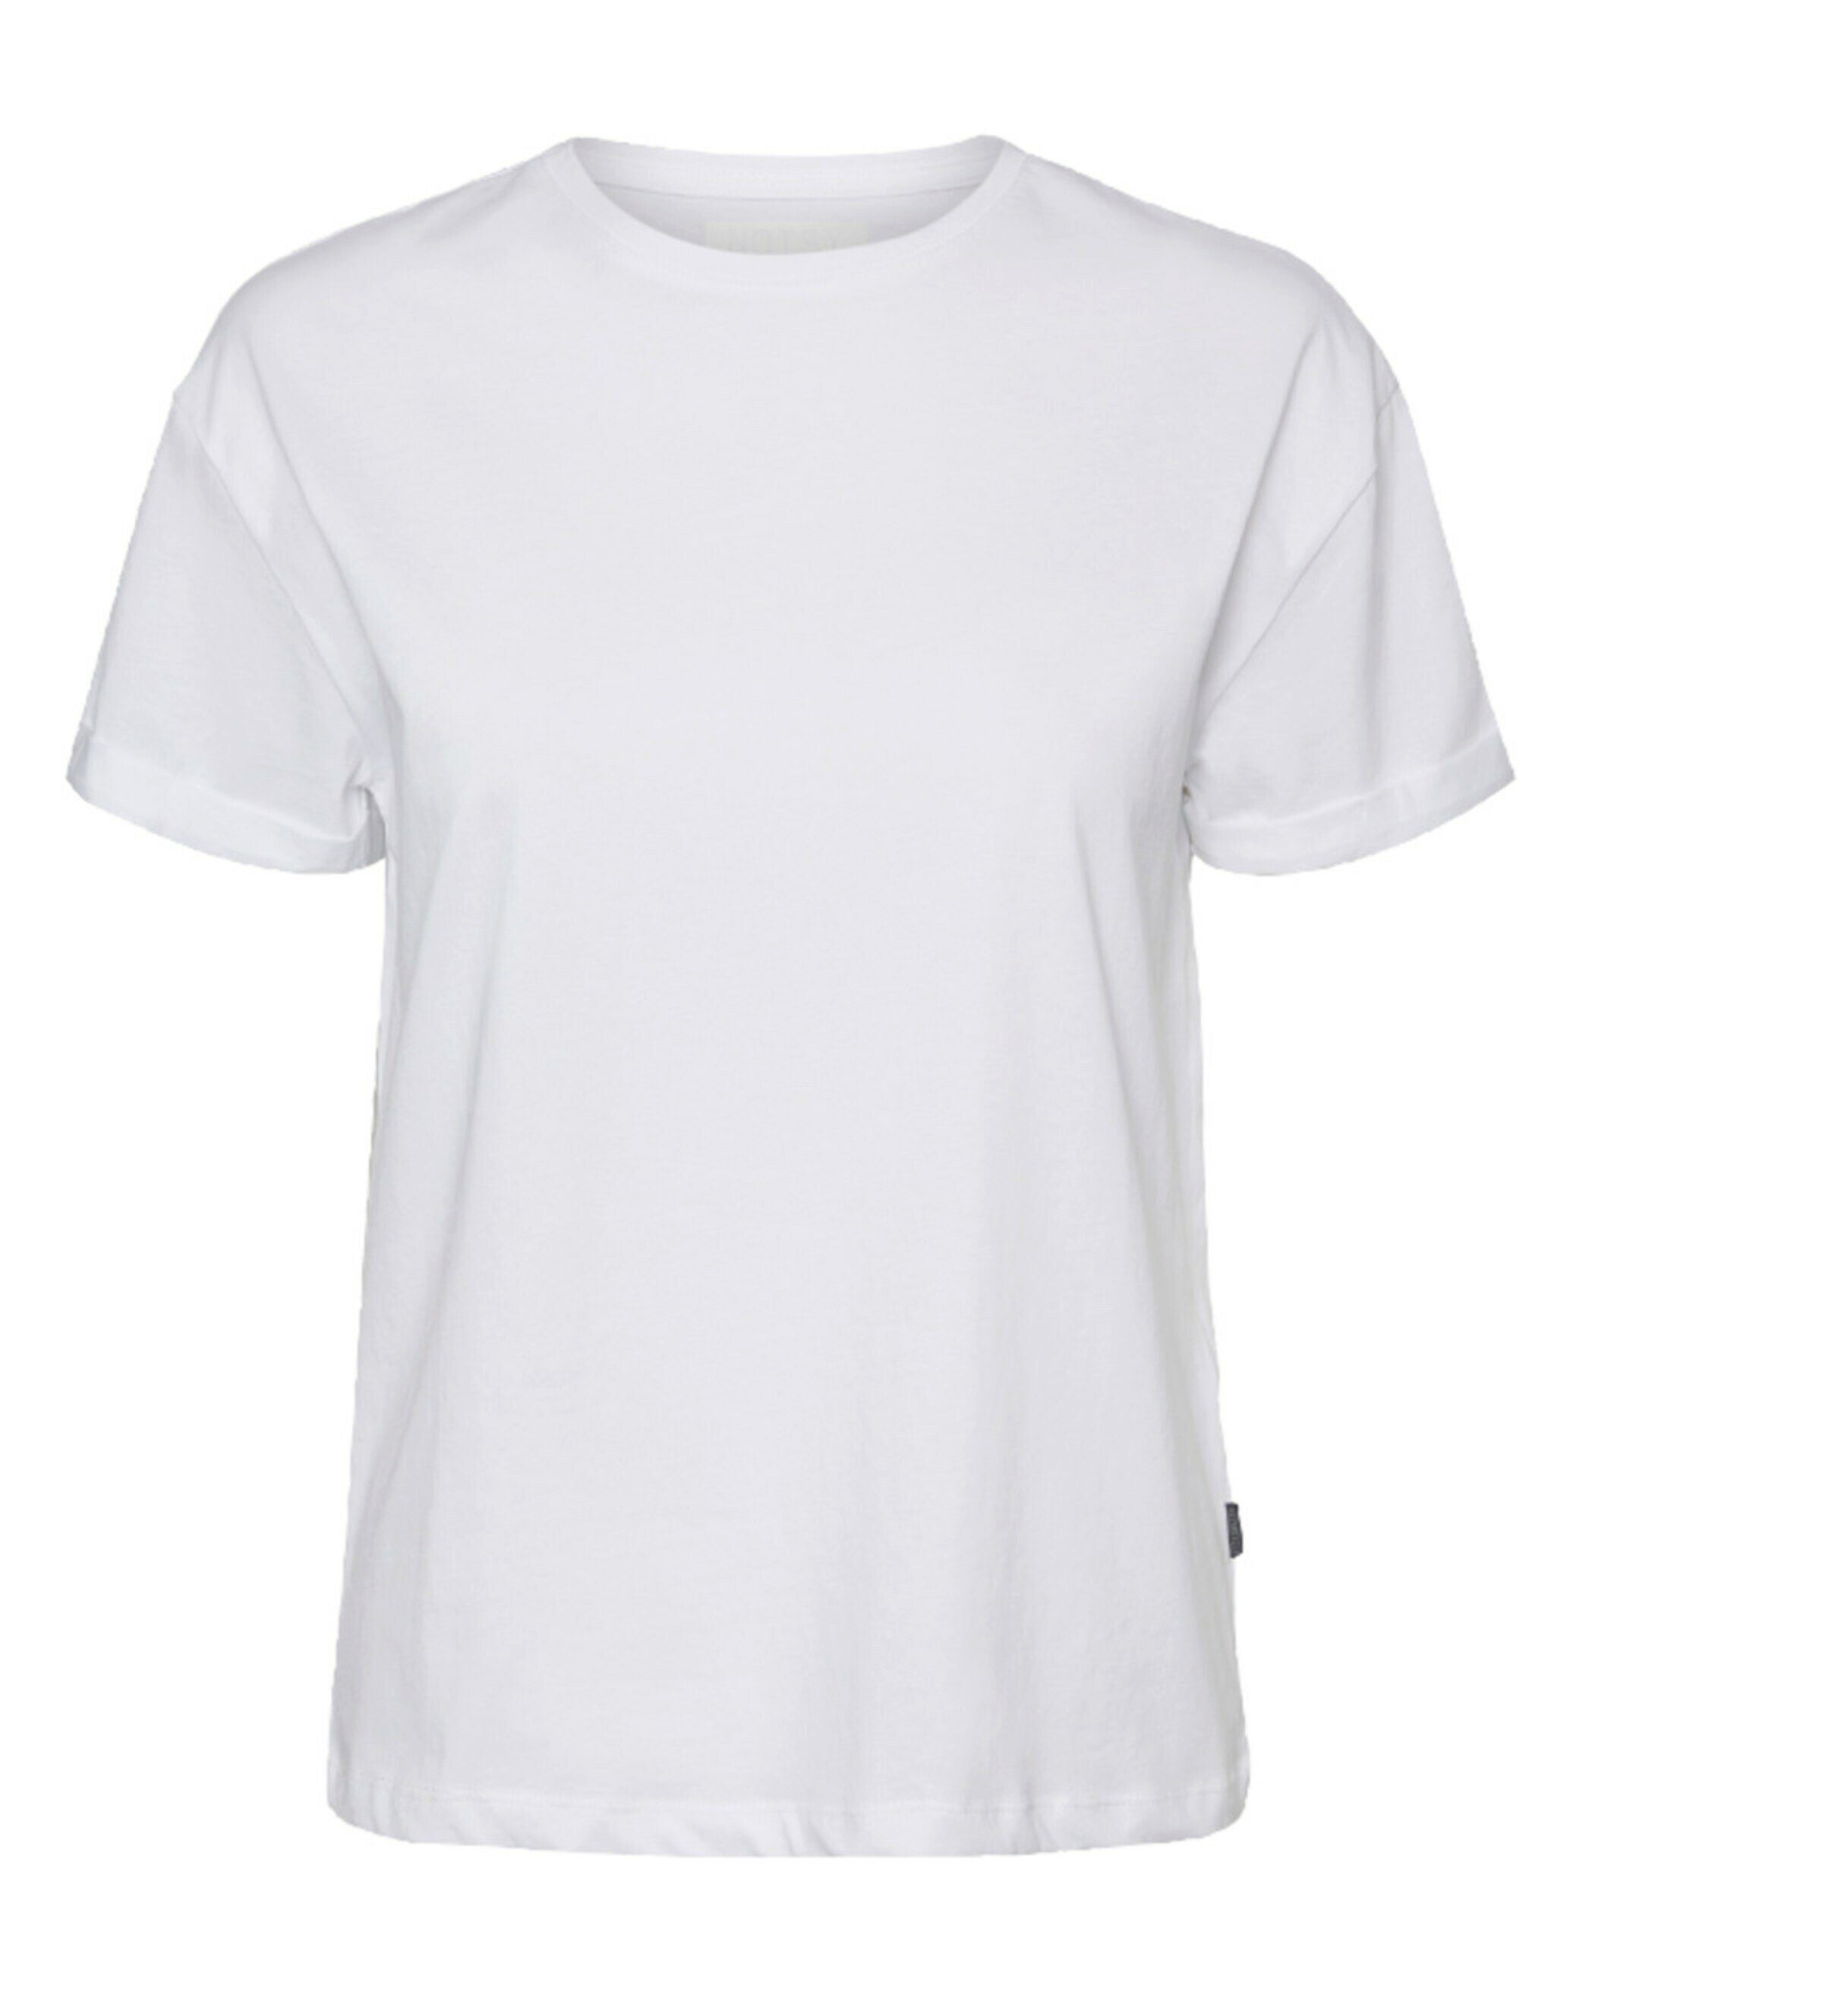 Weiteres Brandy (1-tlg) T-Shirt Details Detail, may White Bright Plain/ohne Noisy